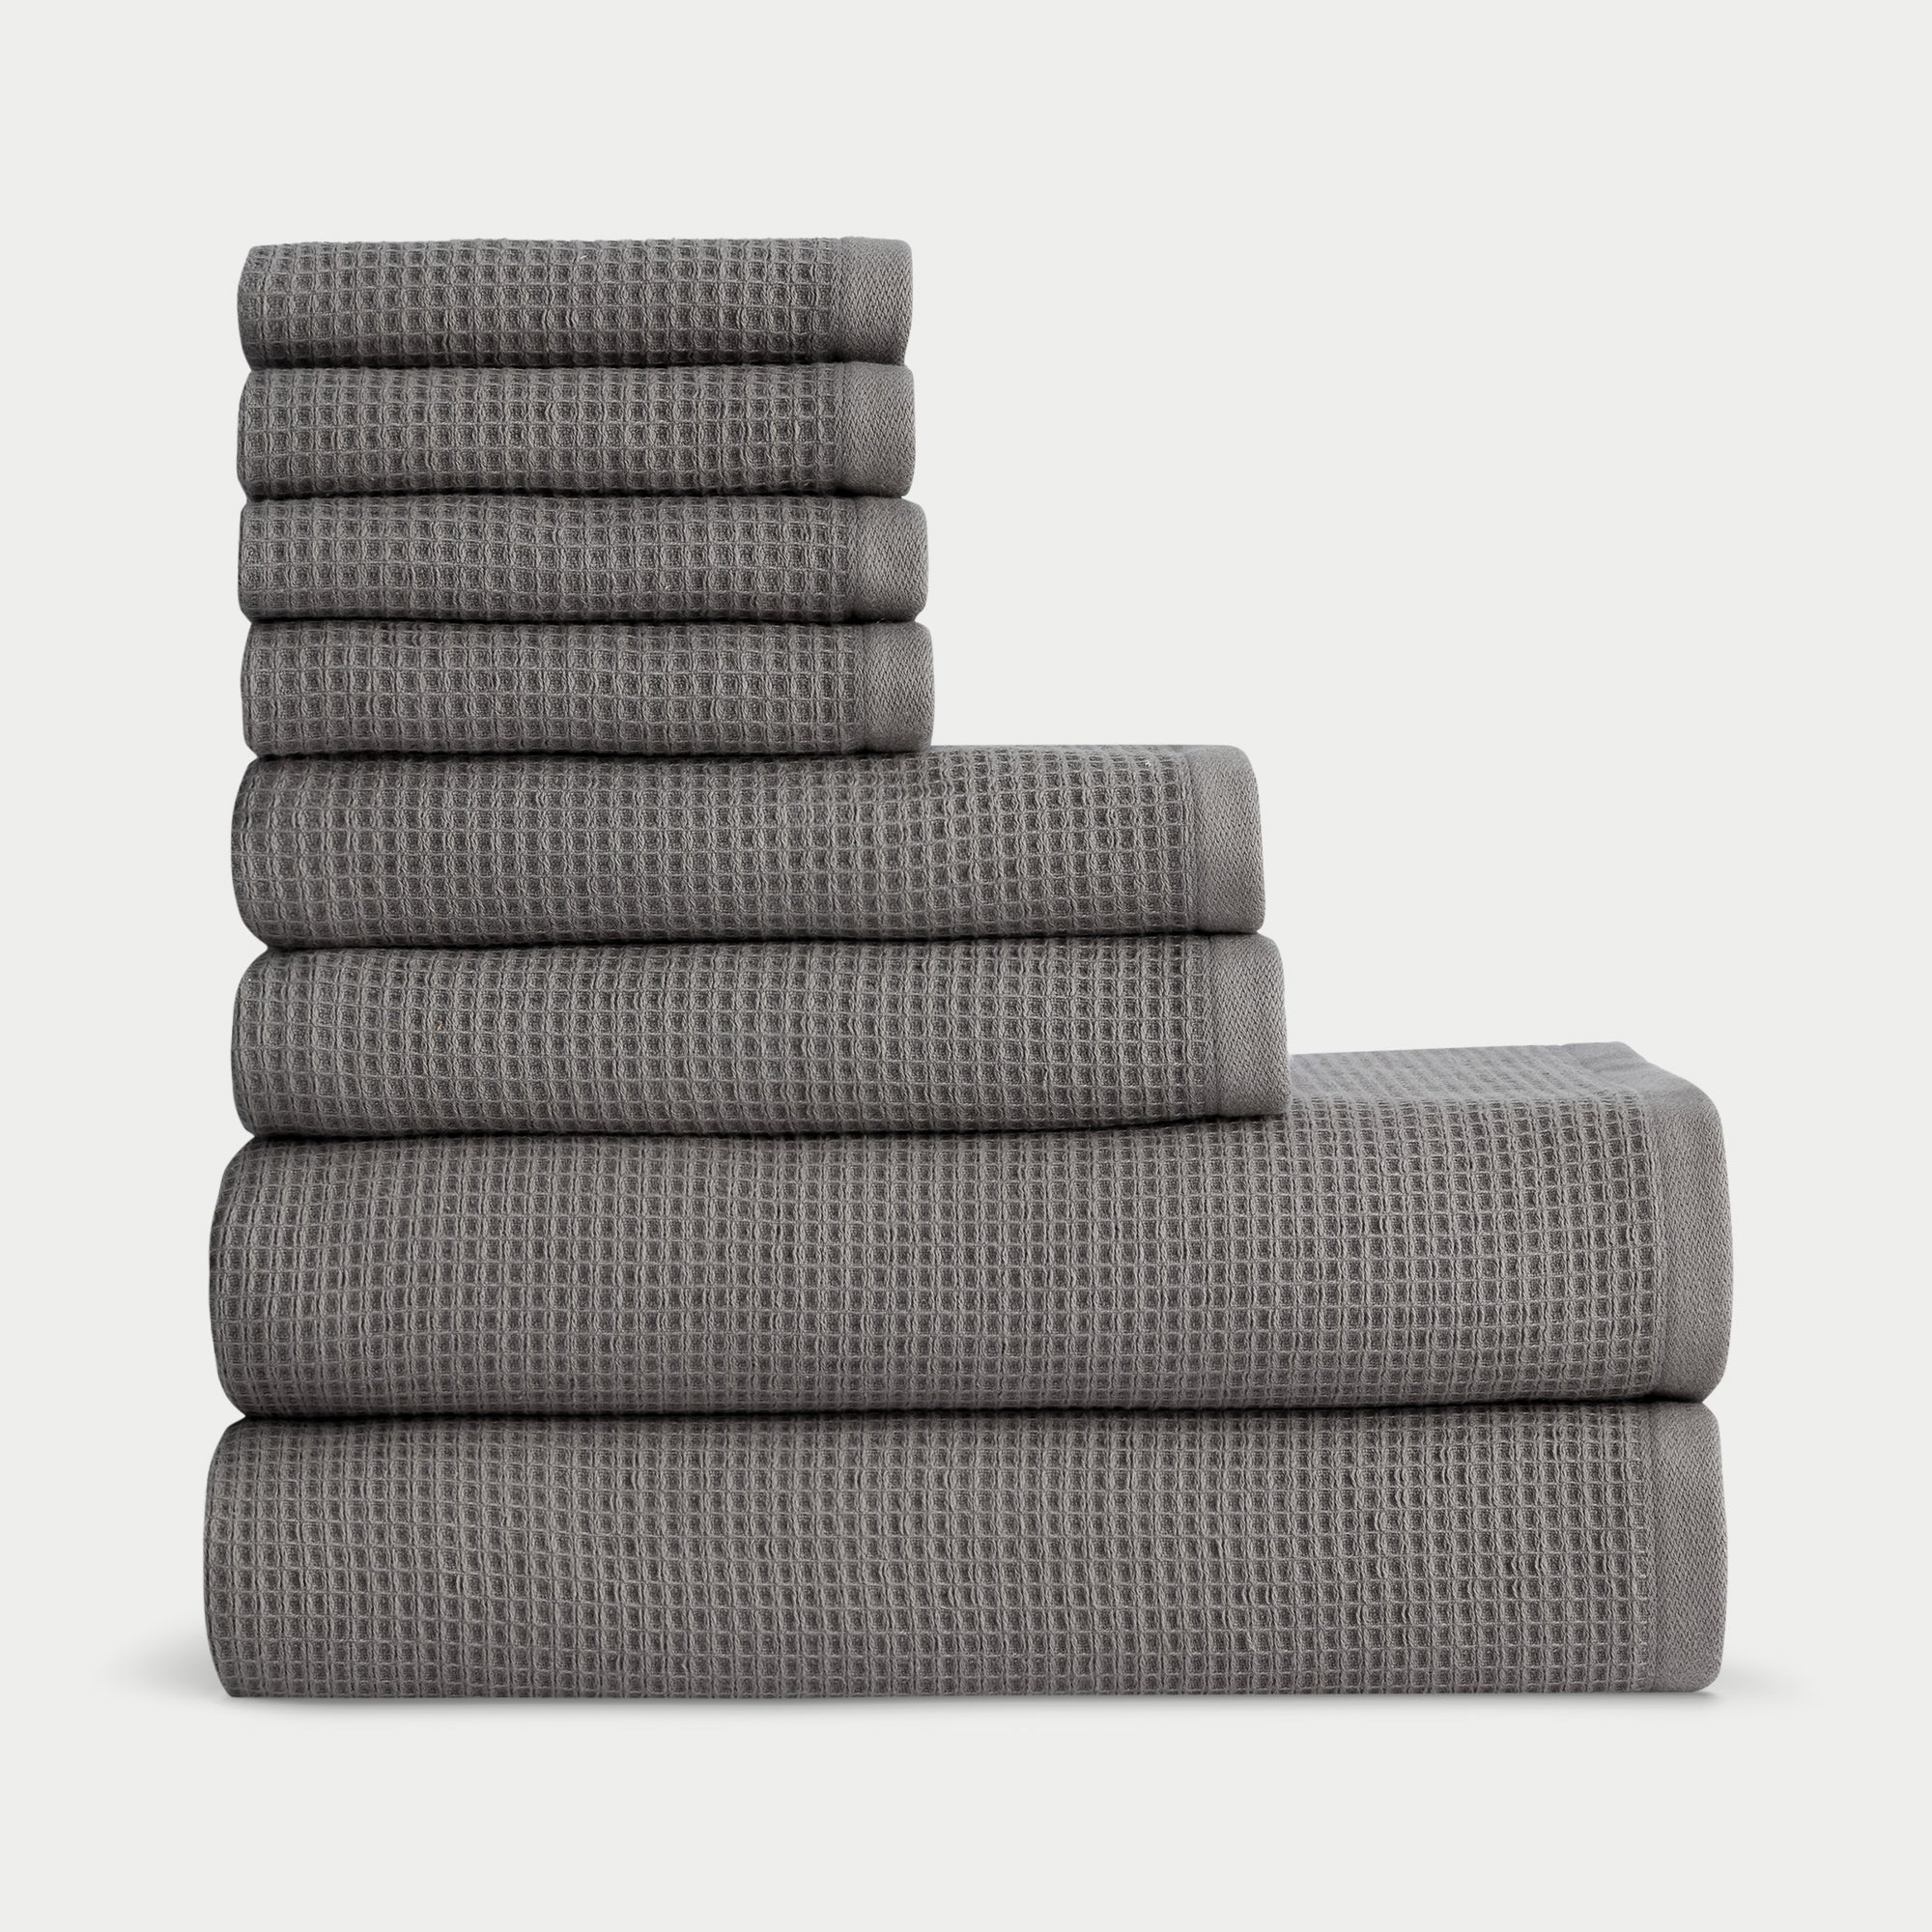 Waffle Bath Towel Set in the color Charcoal. Photo of Charcoal Waffle Bath Towel Set taken with white background. |Color:Charcoal